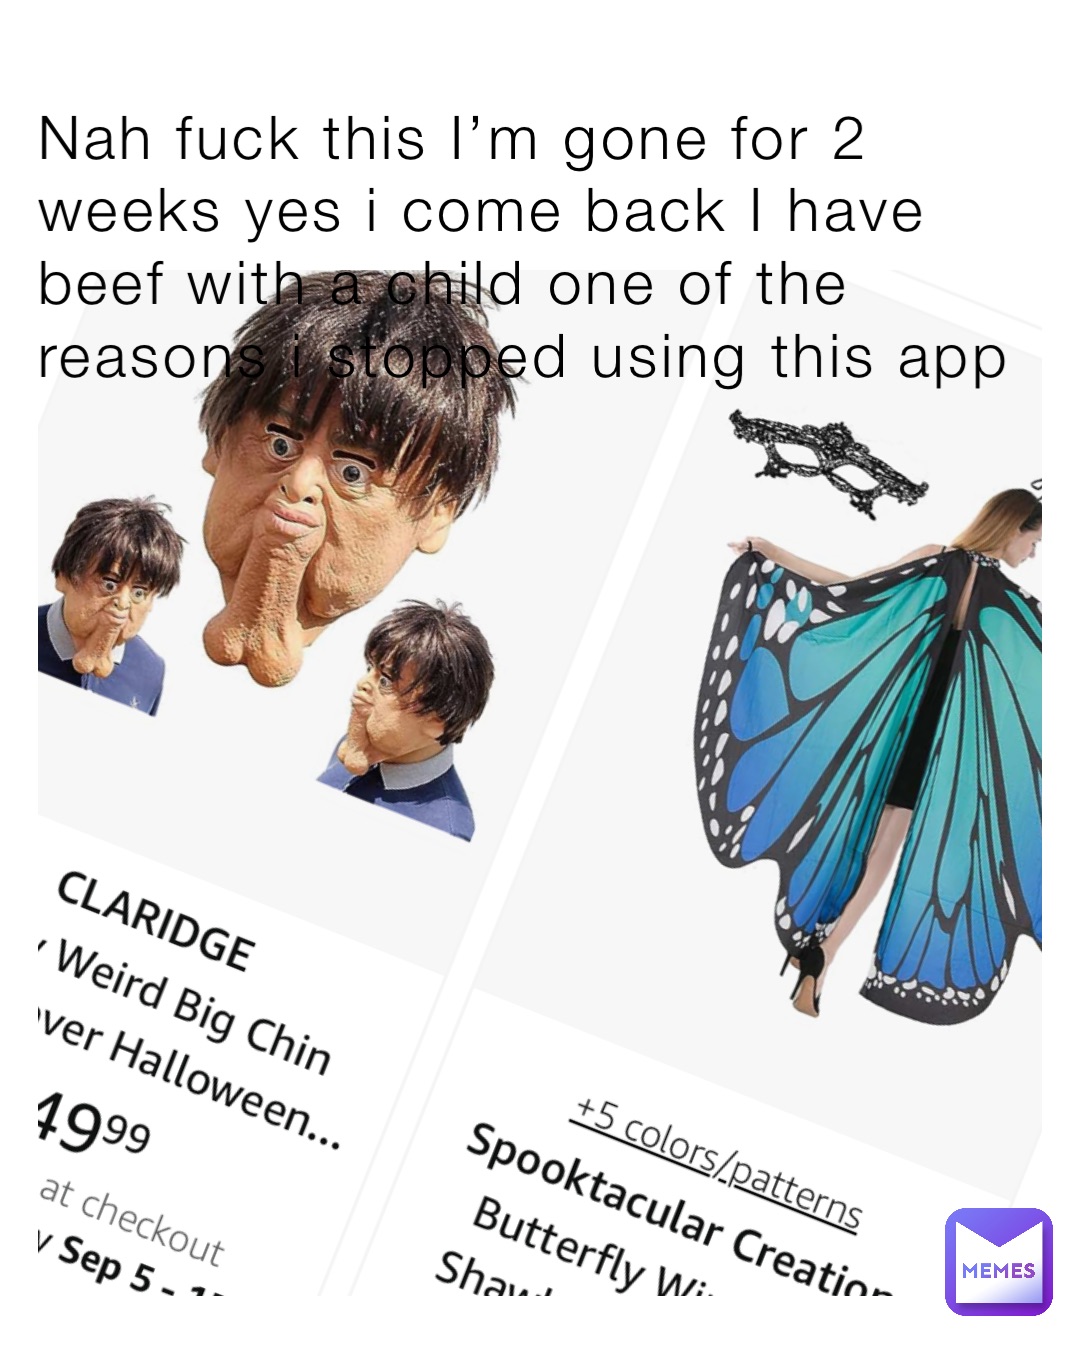 Nah fuck this I’m gone for 2 weeks yes i come back I have beef with a child one of the reasons i stopped using this app